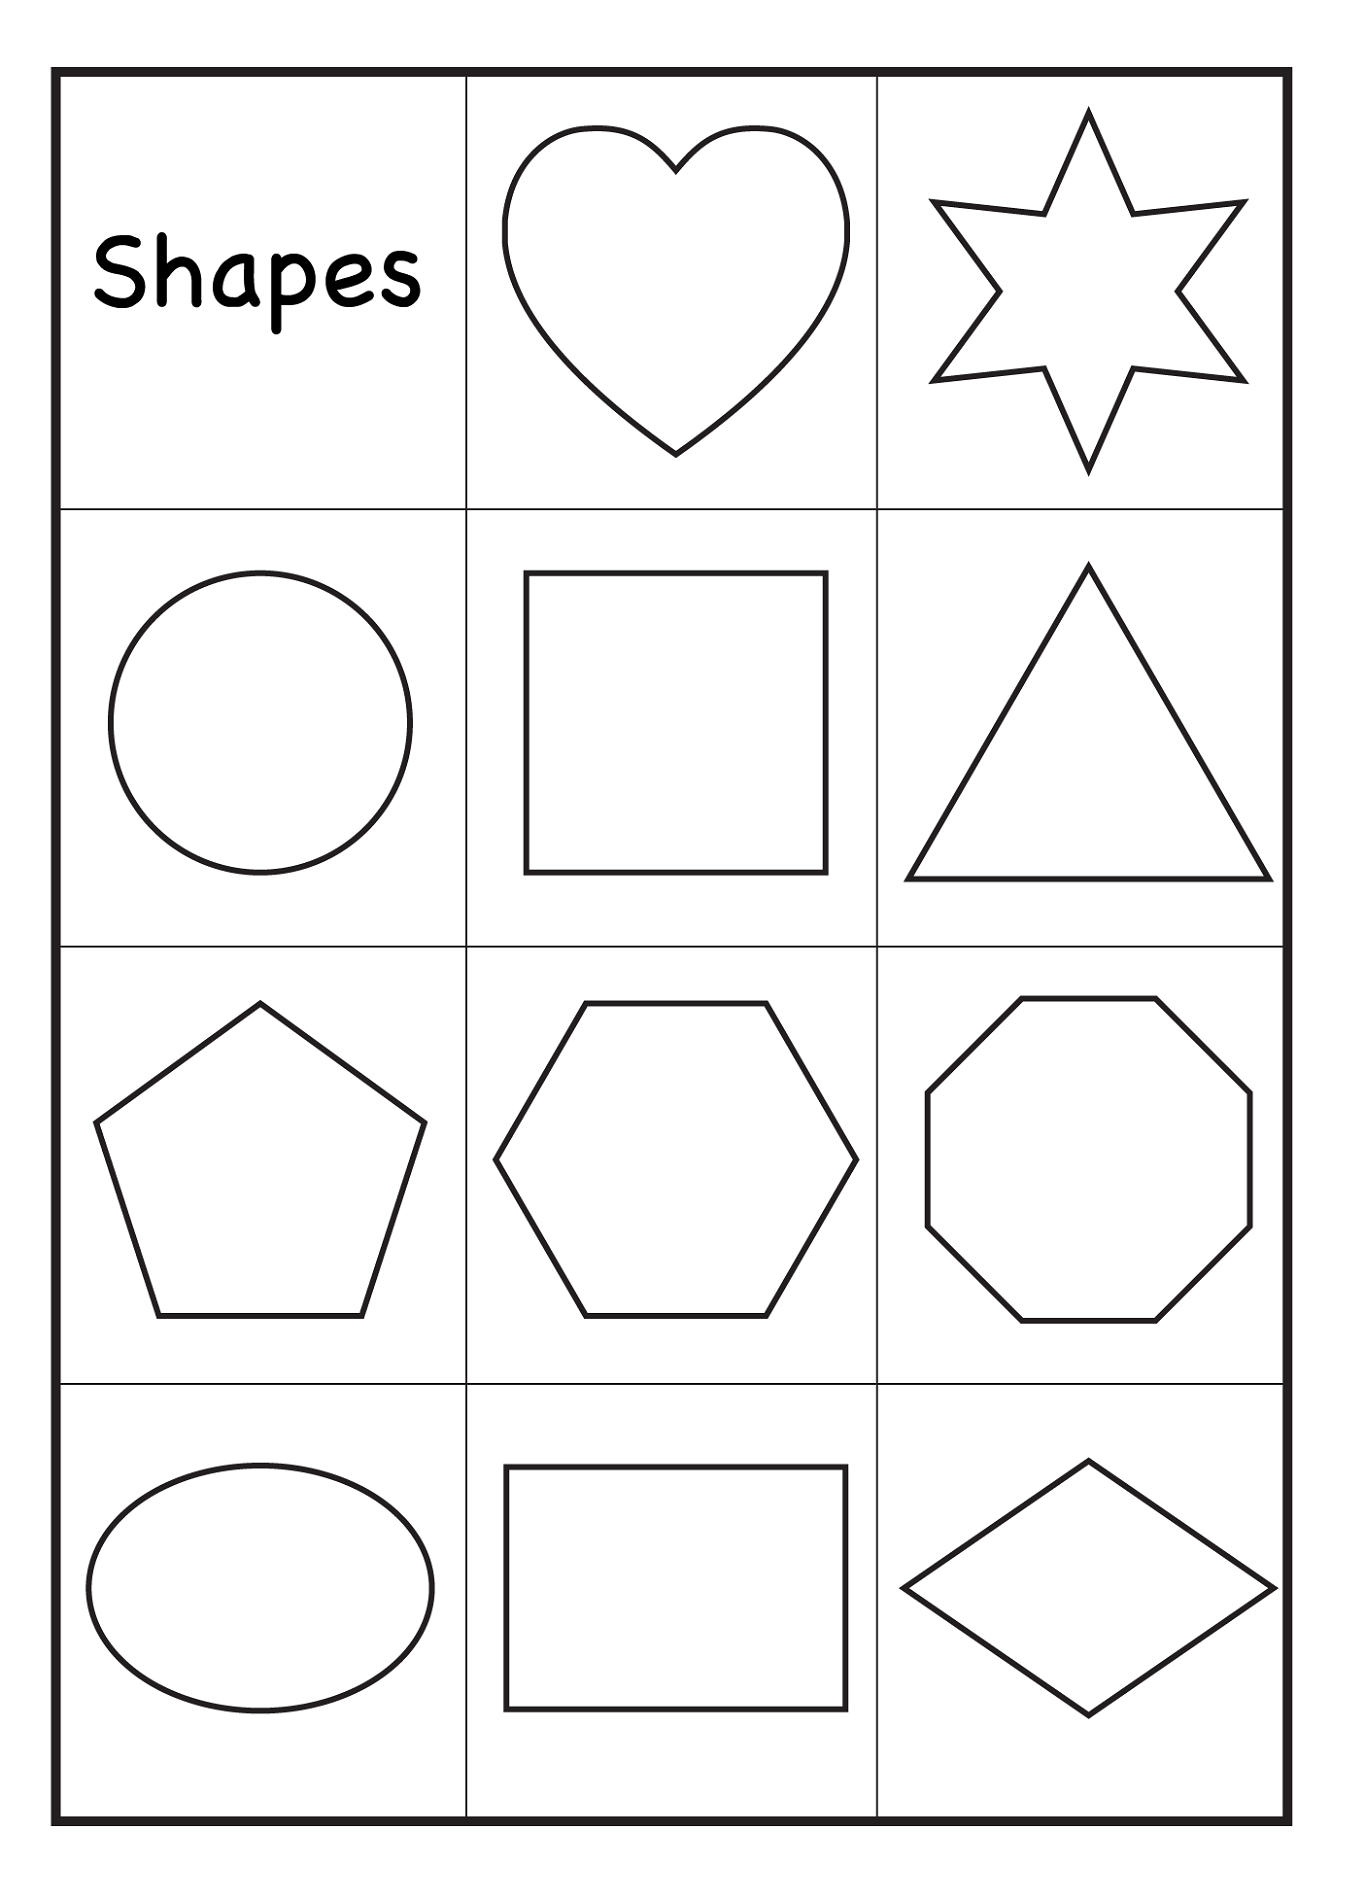 Color by Shapes Worksheets | Activity Shelter